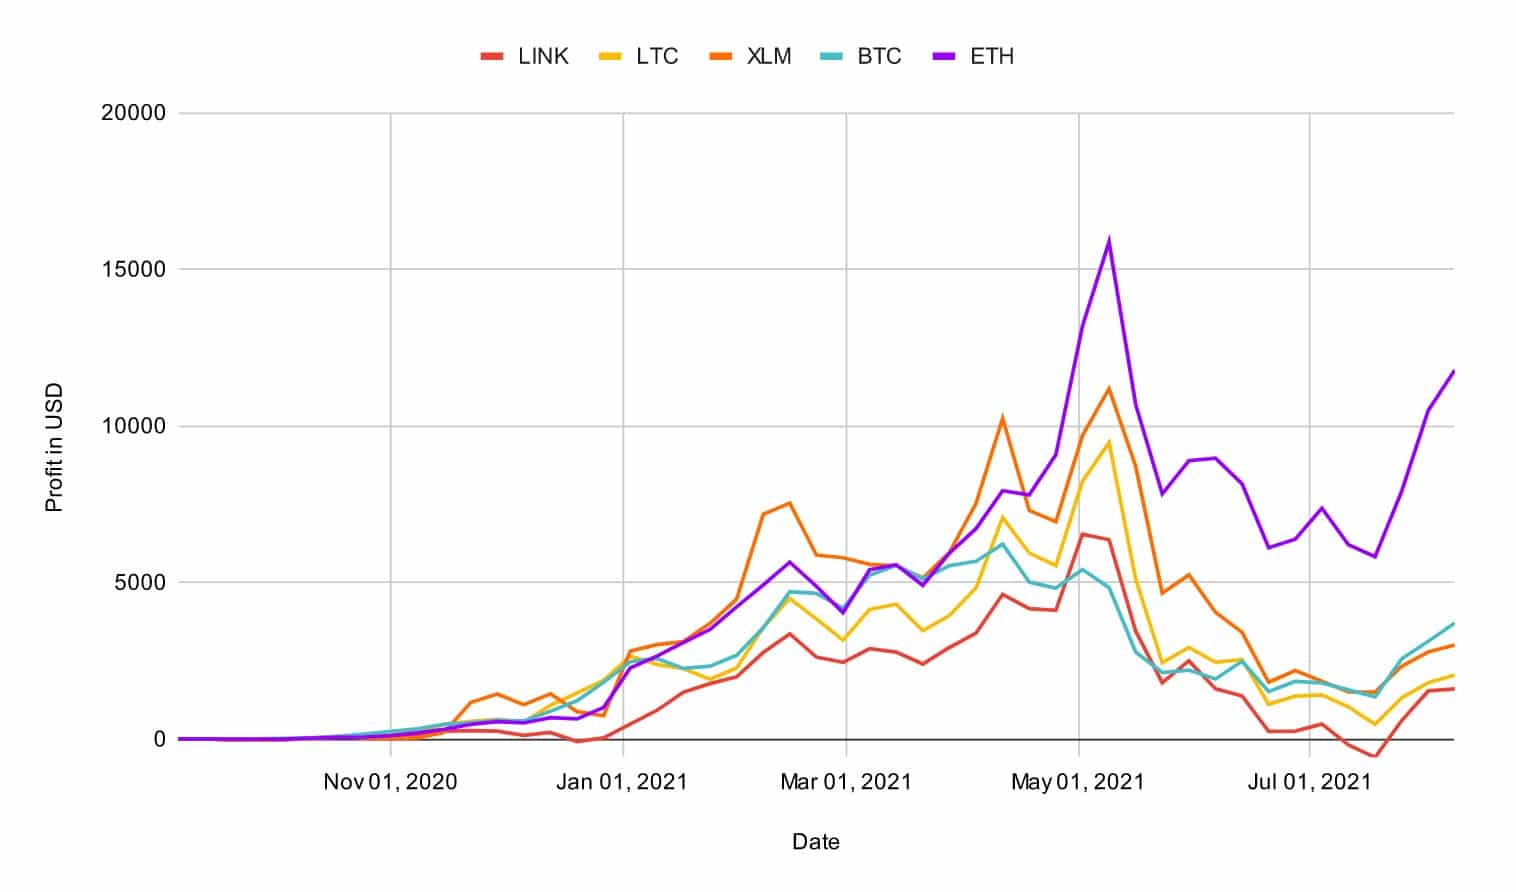 compare the profitability of LINK, LTC, XLM, BTC and ETH